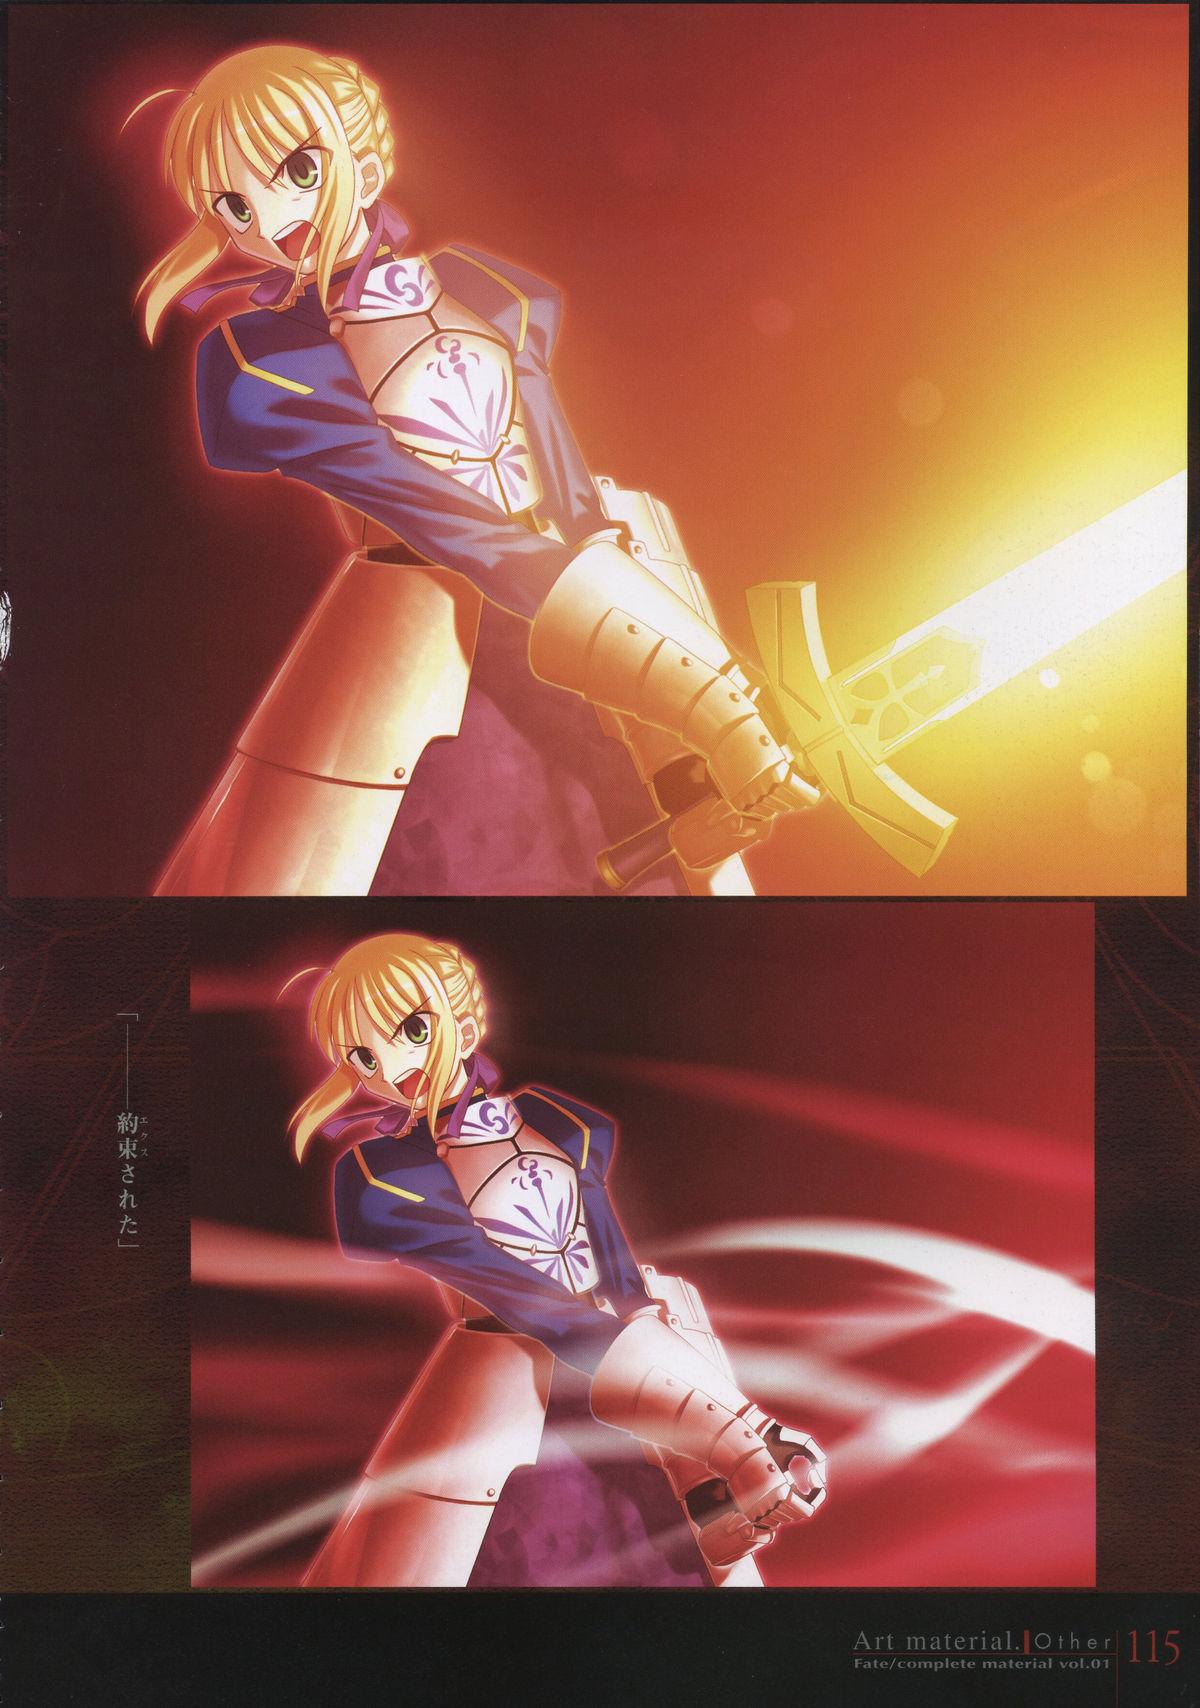 Fate/complete material I - Art material. 119